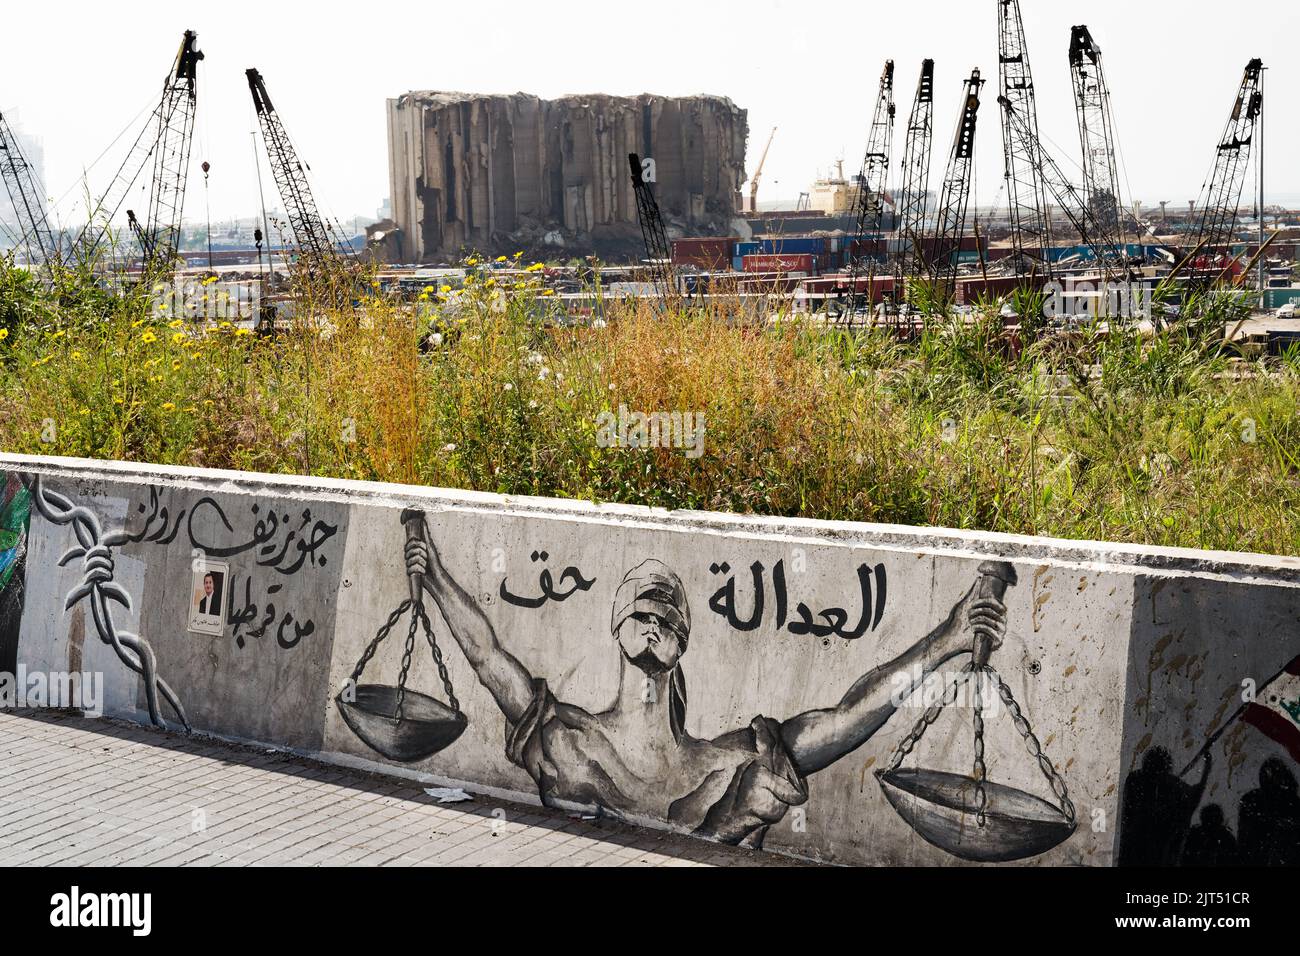 Beirut, Lebanon: Graffiti on the wall to the port showing the destroyed grain silos from the massive explosion of 2,750 tons of ammonium nitrate stored in the city's port that devastated the port and the city on 8/4/2020 Stock Photo